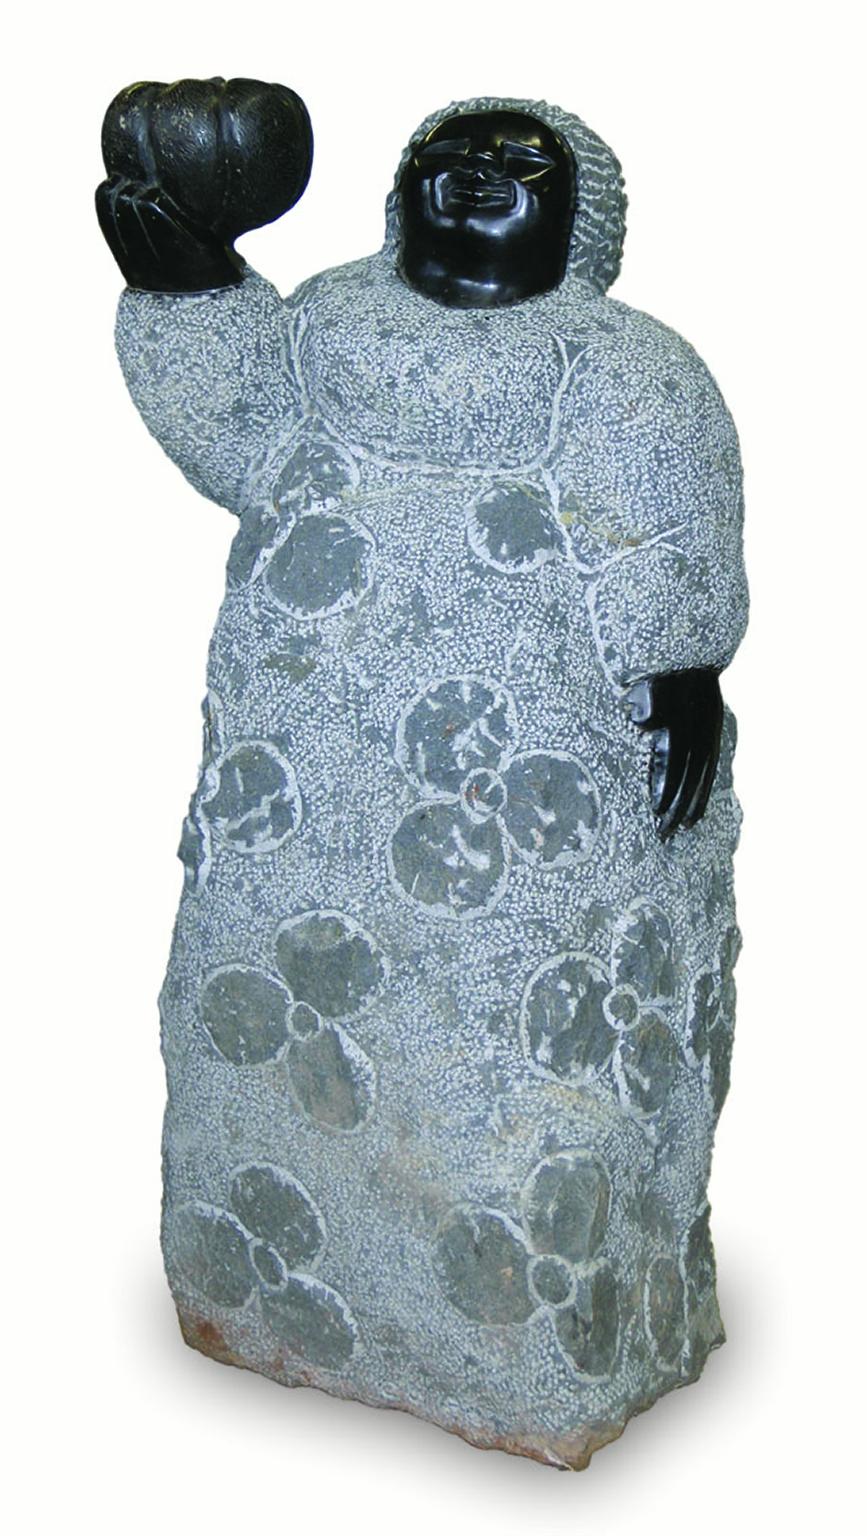 "Mother Holding a Pumpkin" is an original sculpture in black serpentine stone by Colleen Madamombe. The sculpture is a portly woman with a cheerful face holding a large pumpkin in her right hand. It is a wonderful example of Madamombe's mastery of